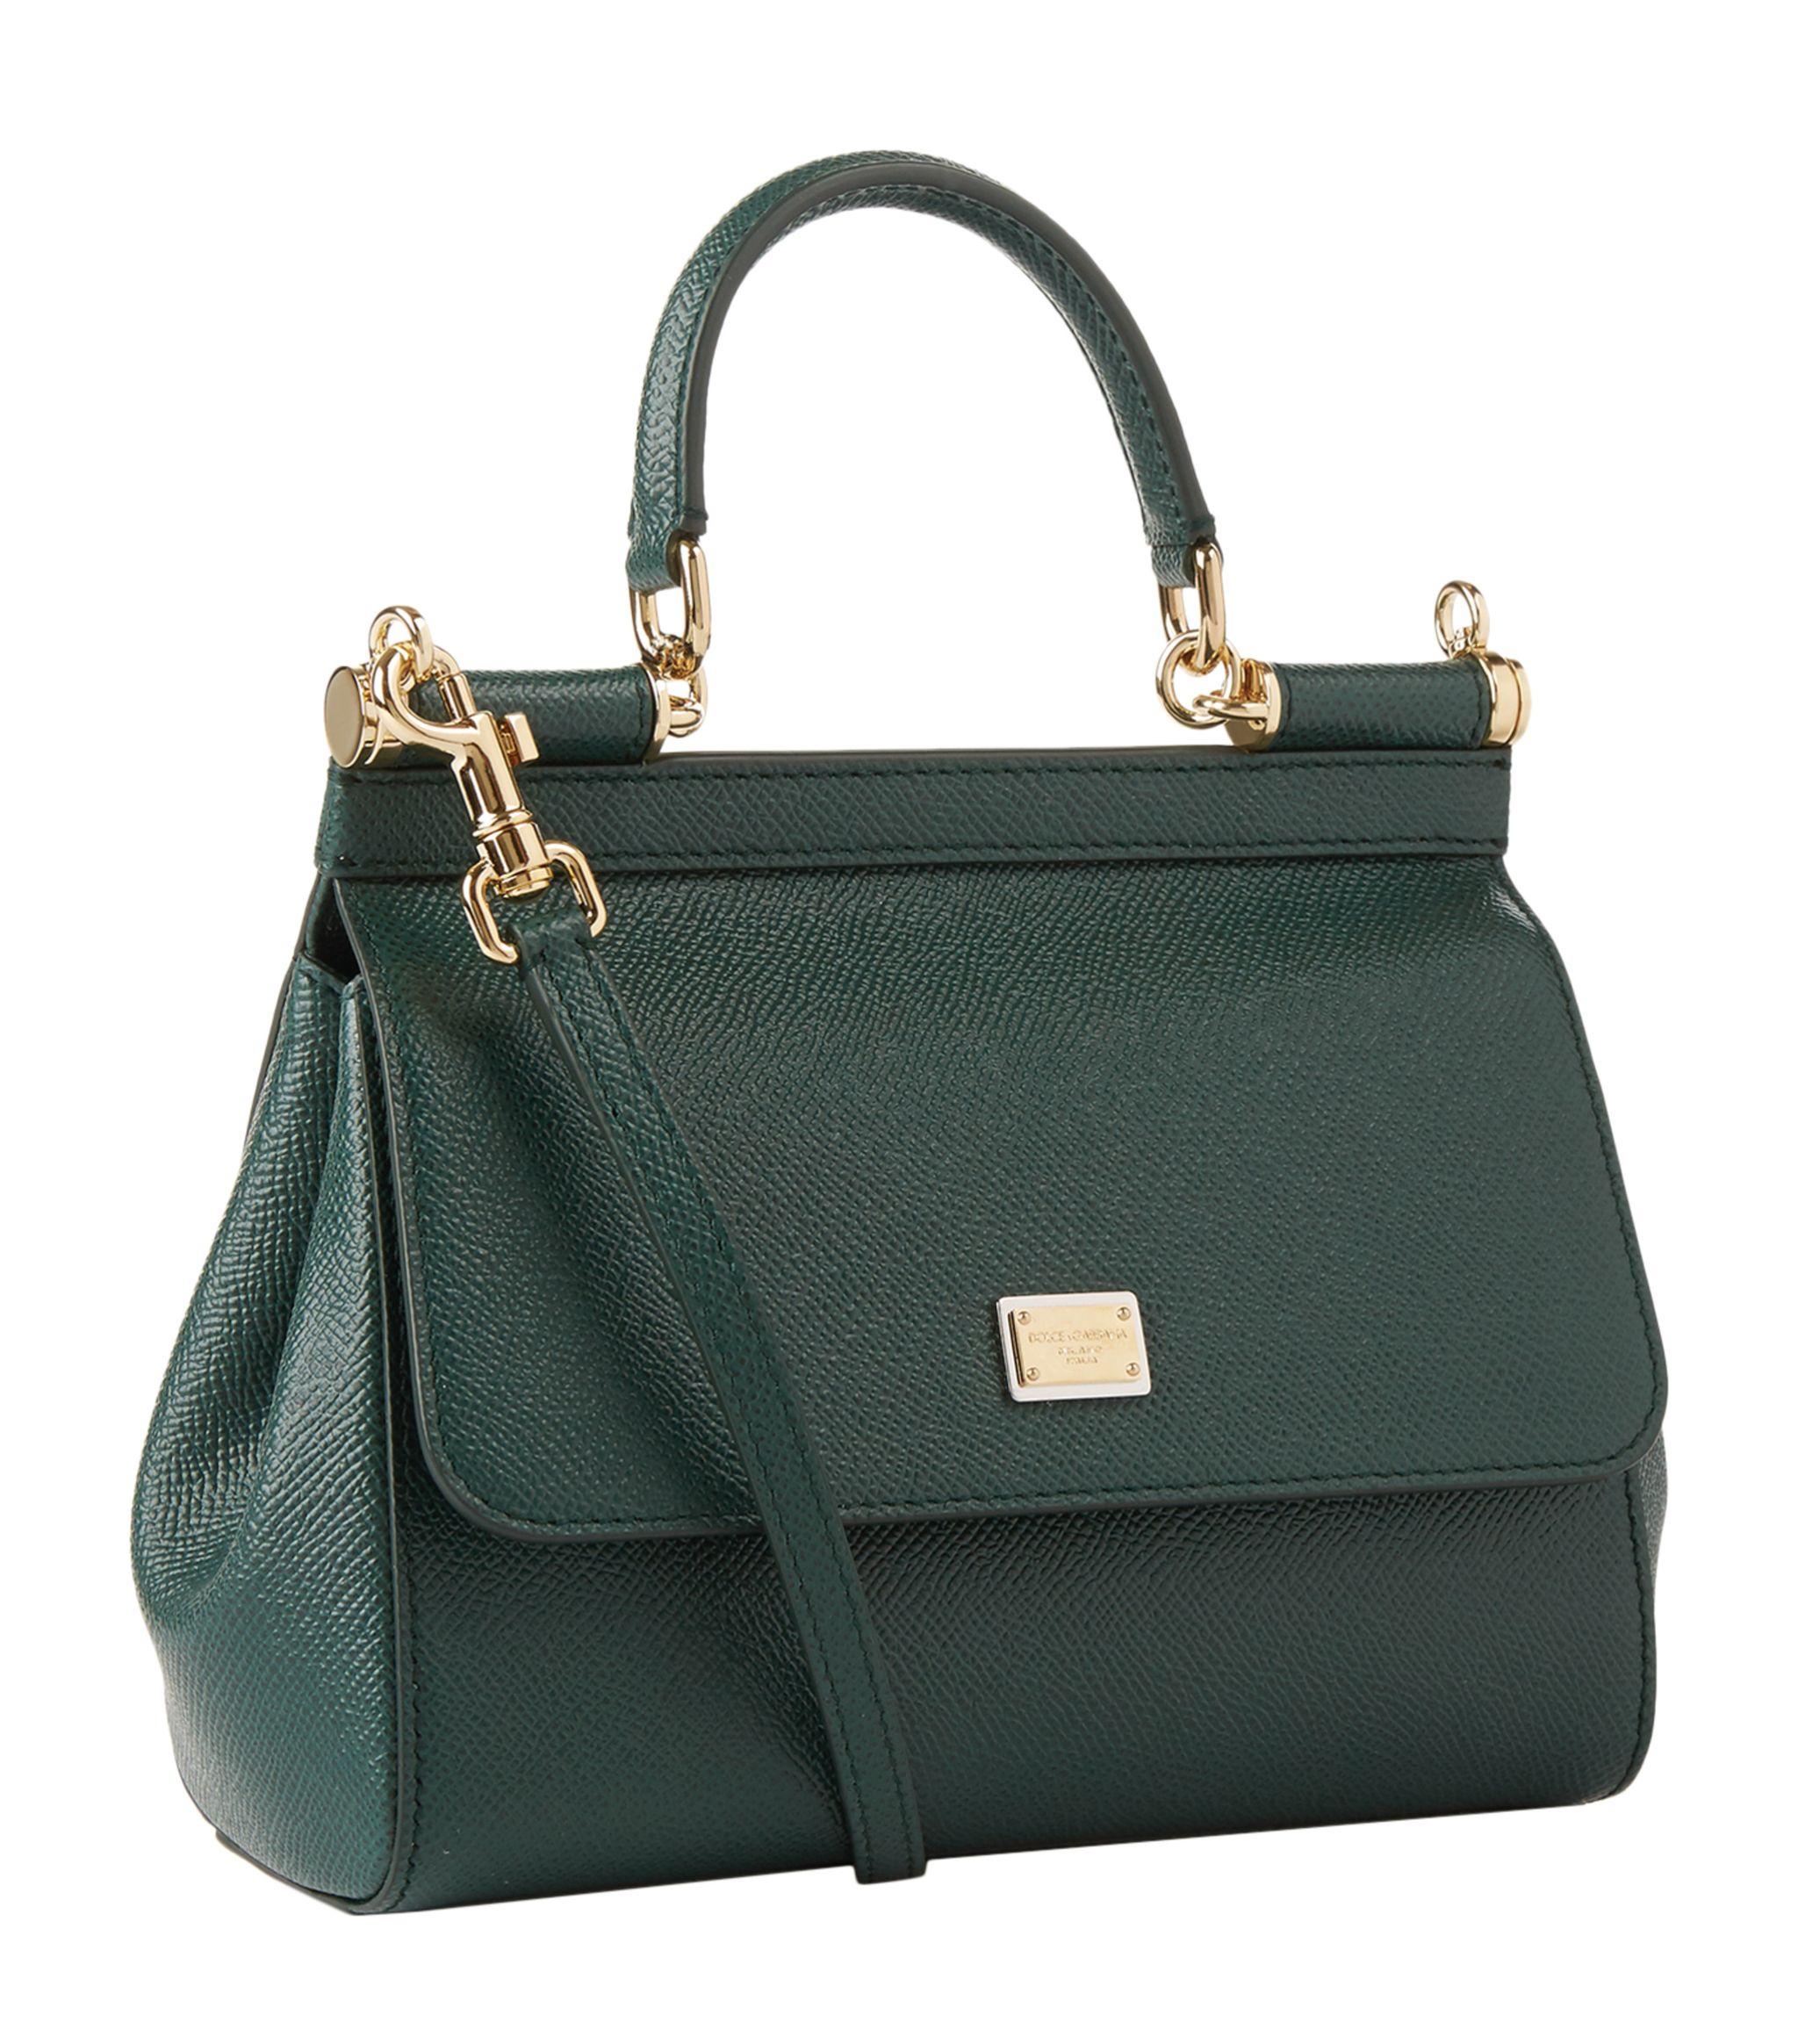 Dolce & Gabbana Handbag From The Sicily Line In Small Size in Green